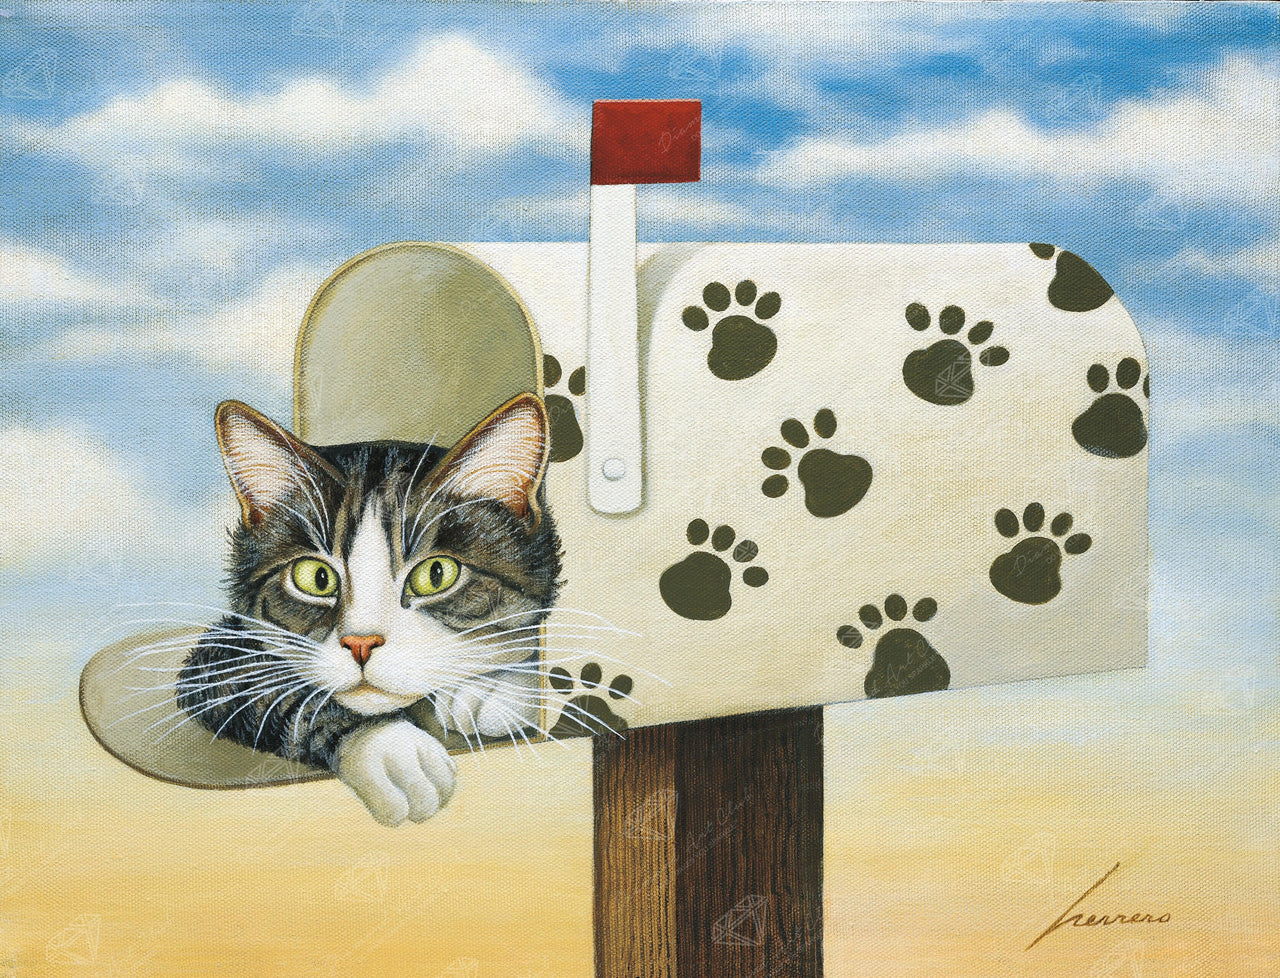 Diamond Painting Toulouse Largent Mailbox 22" x 17" (56cm x 43cm) / Round with 33 Colors including 3 ABs / 30,248